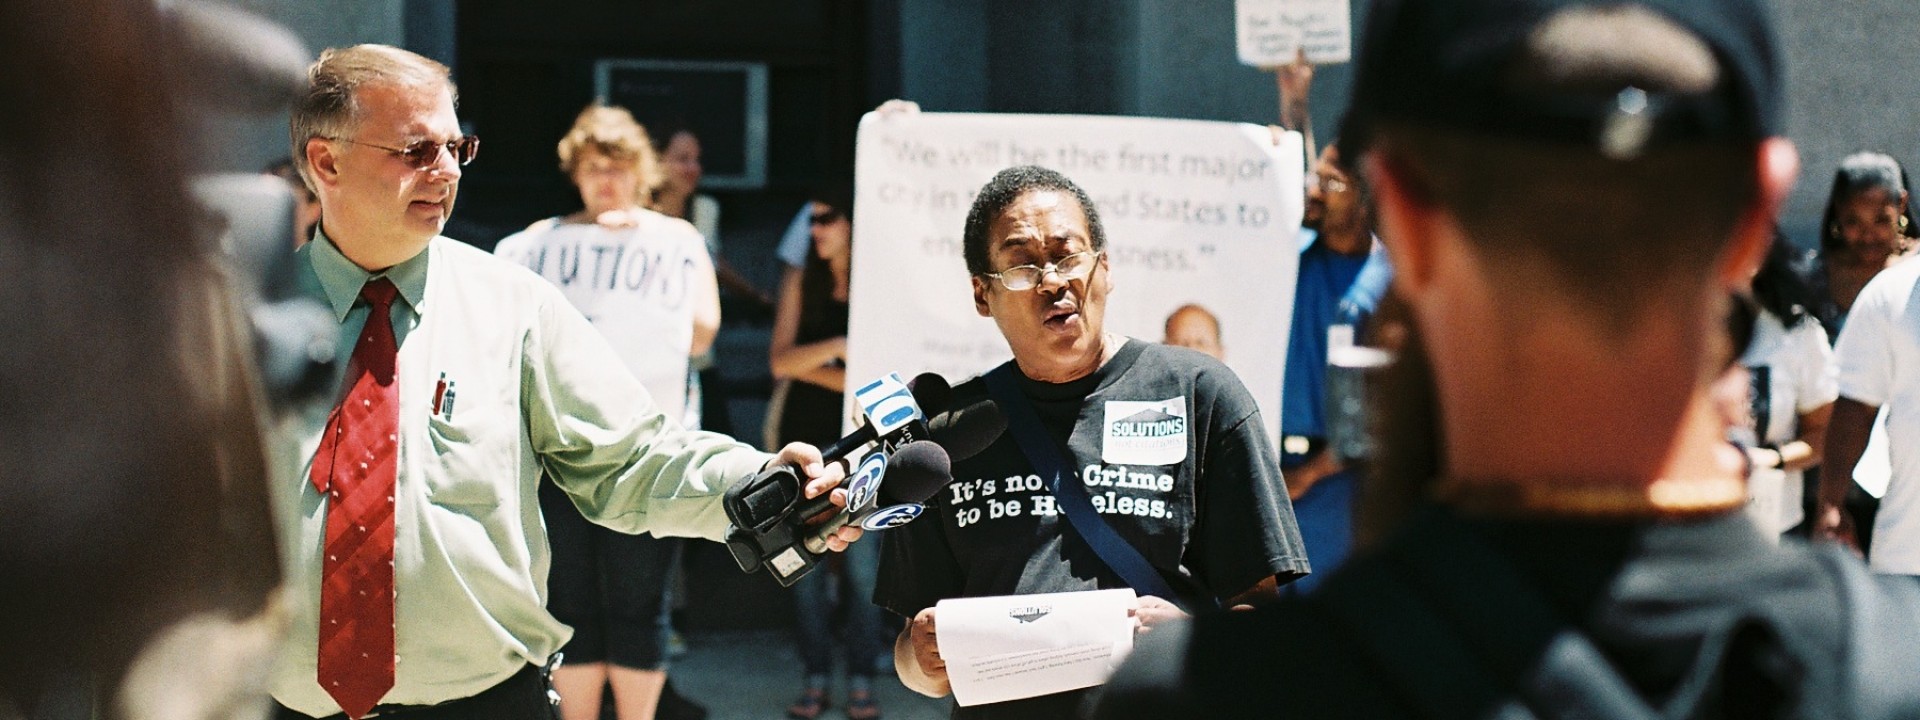 A Project HOME advocate speaking at a rally